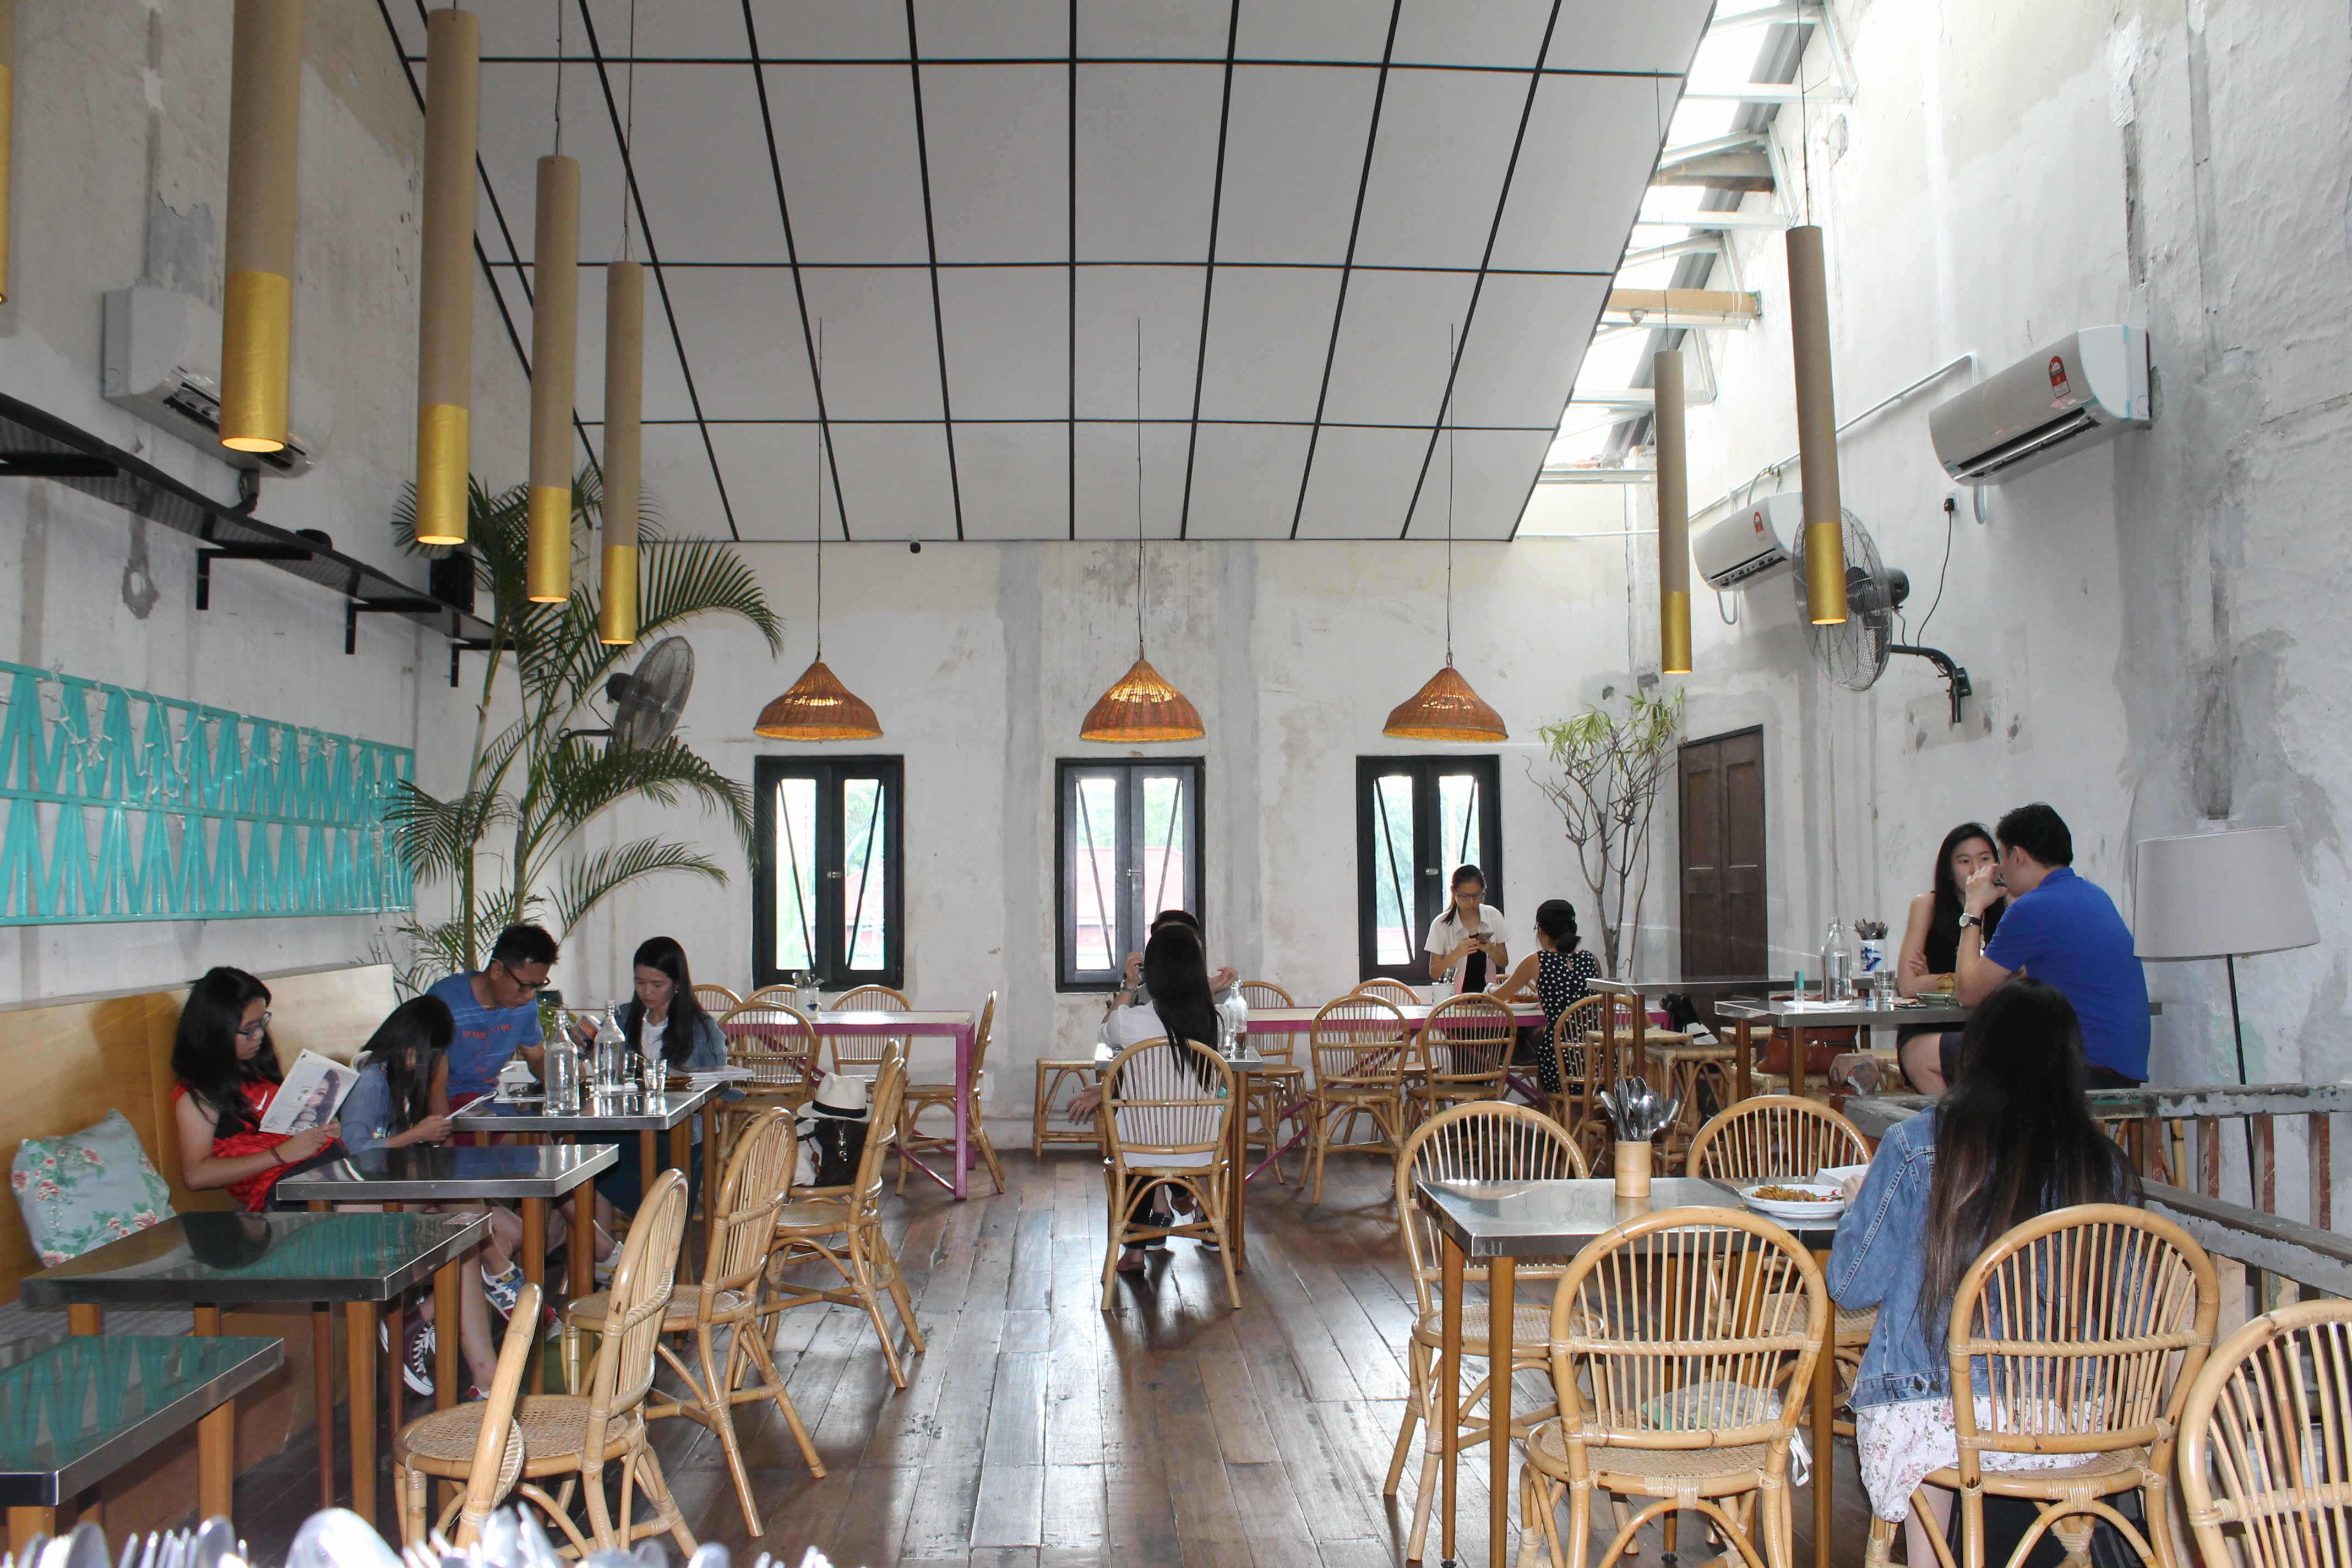 5 Cafes You Have To Visit When in Kuala Lumpur